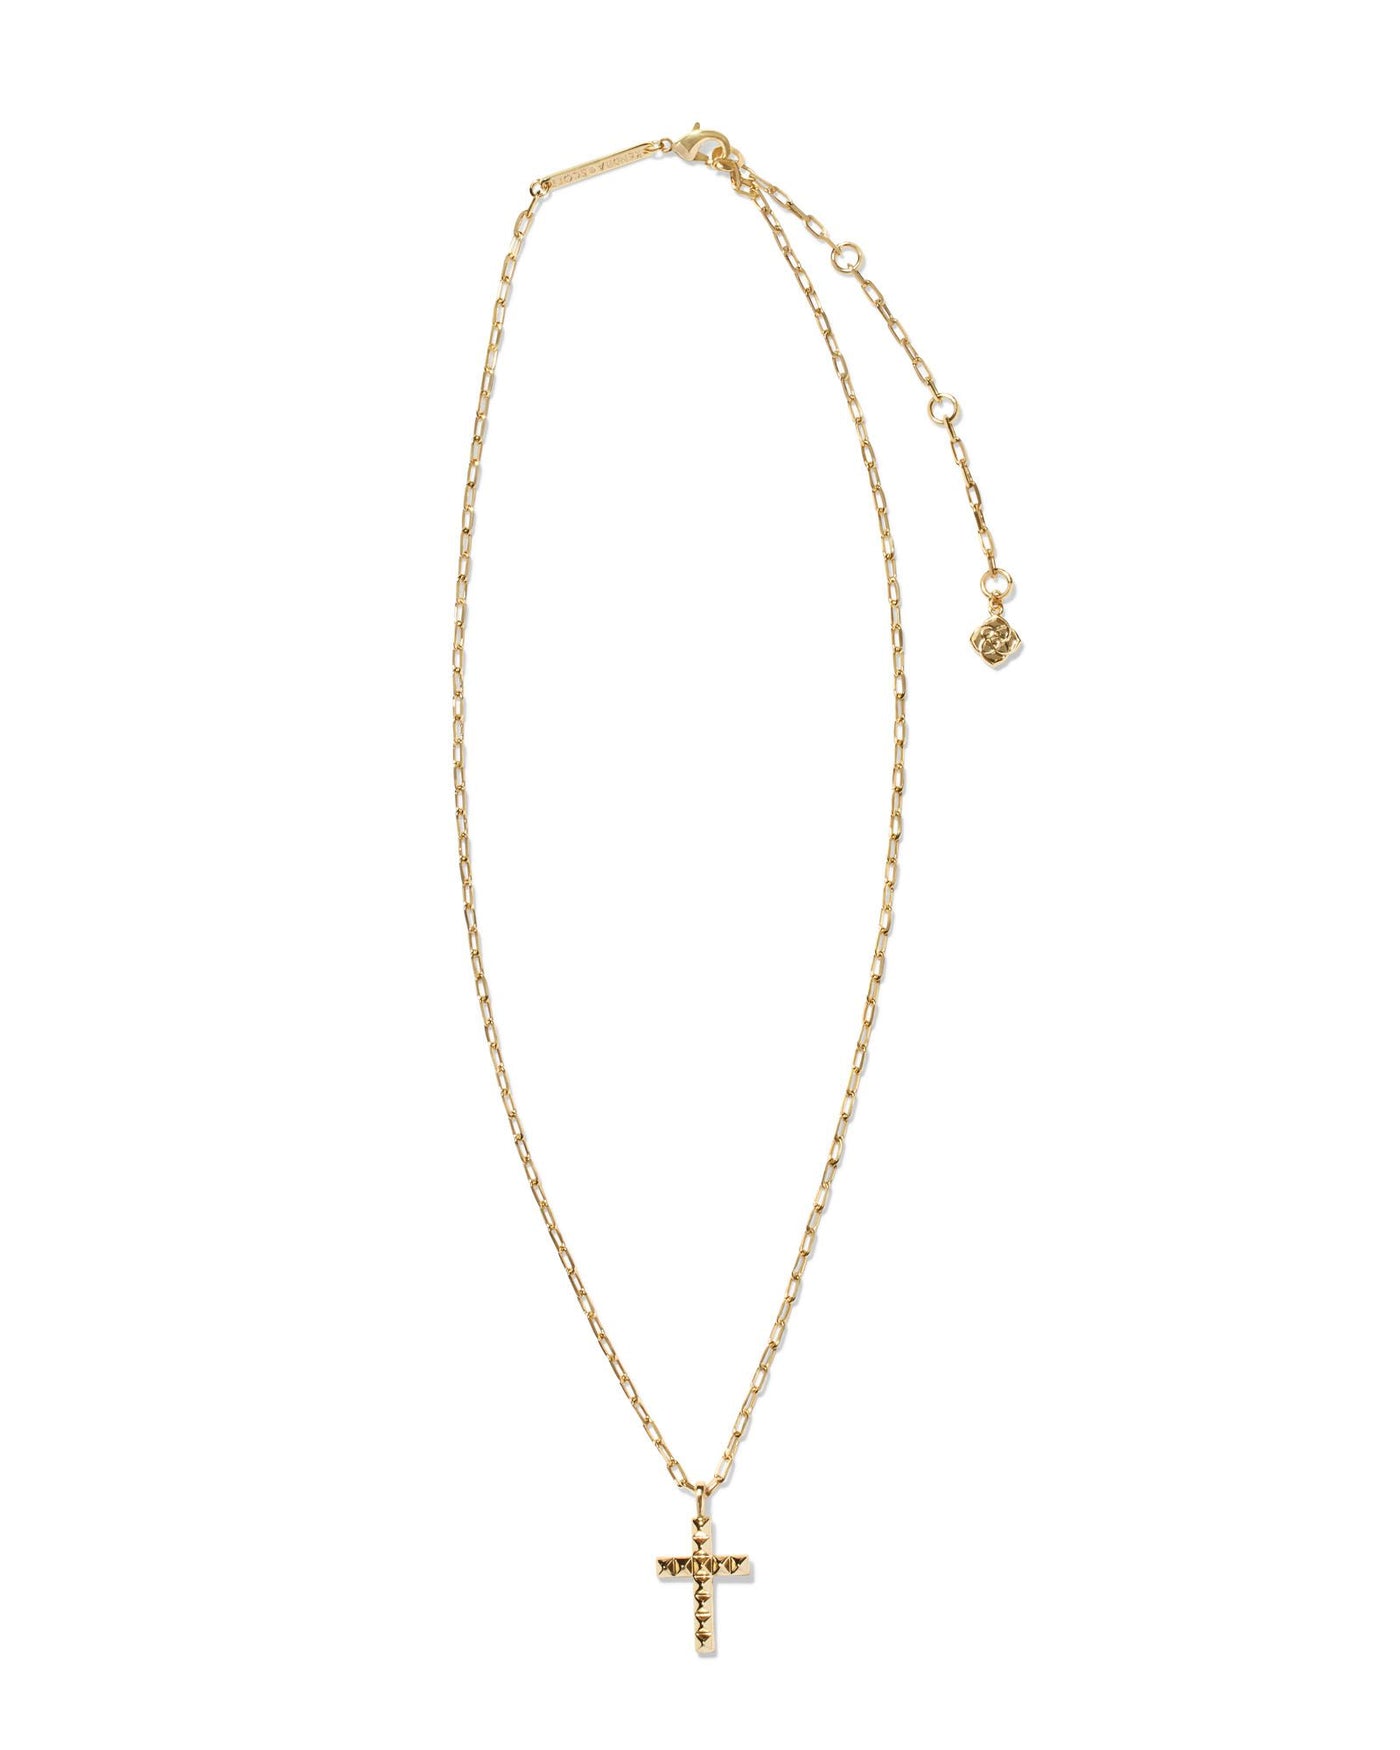 Kendra Scott Jada Cross Pendant Necklace in Gold on white background full view.